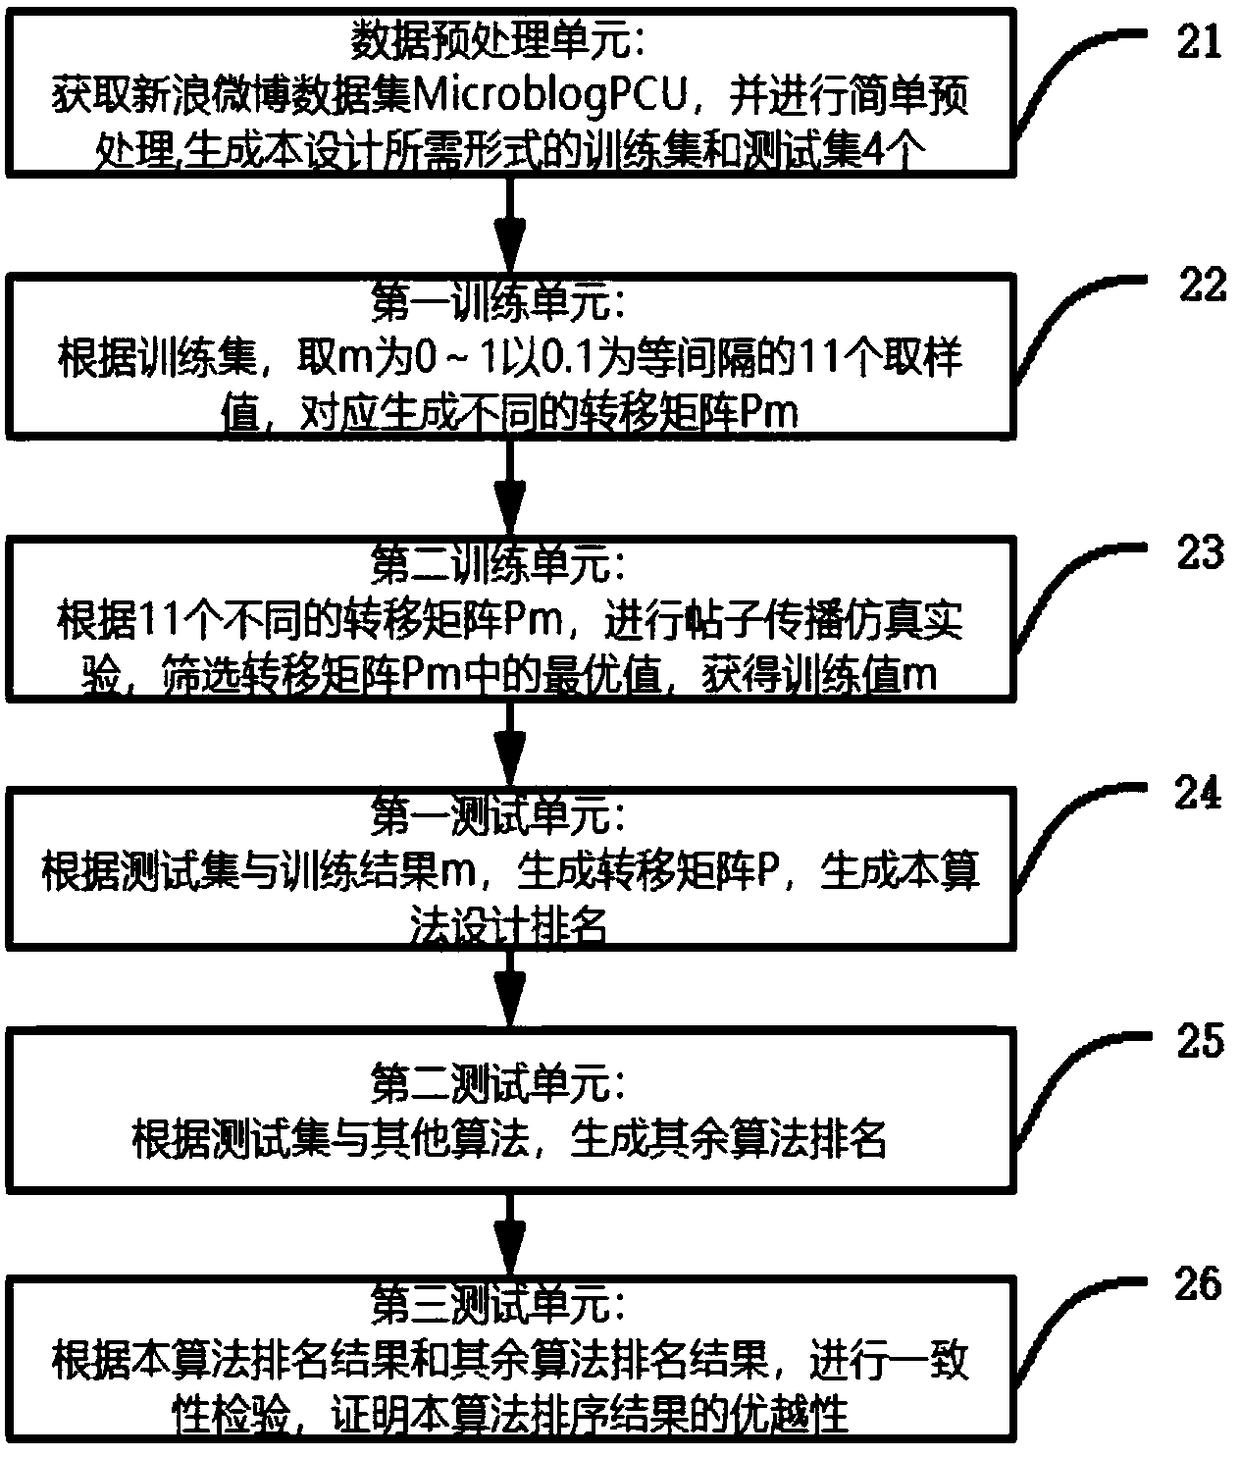 Method and system for ranking influence of social network nodes